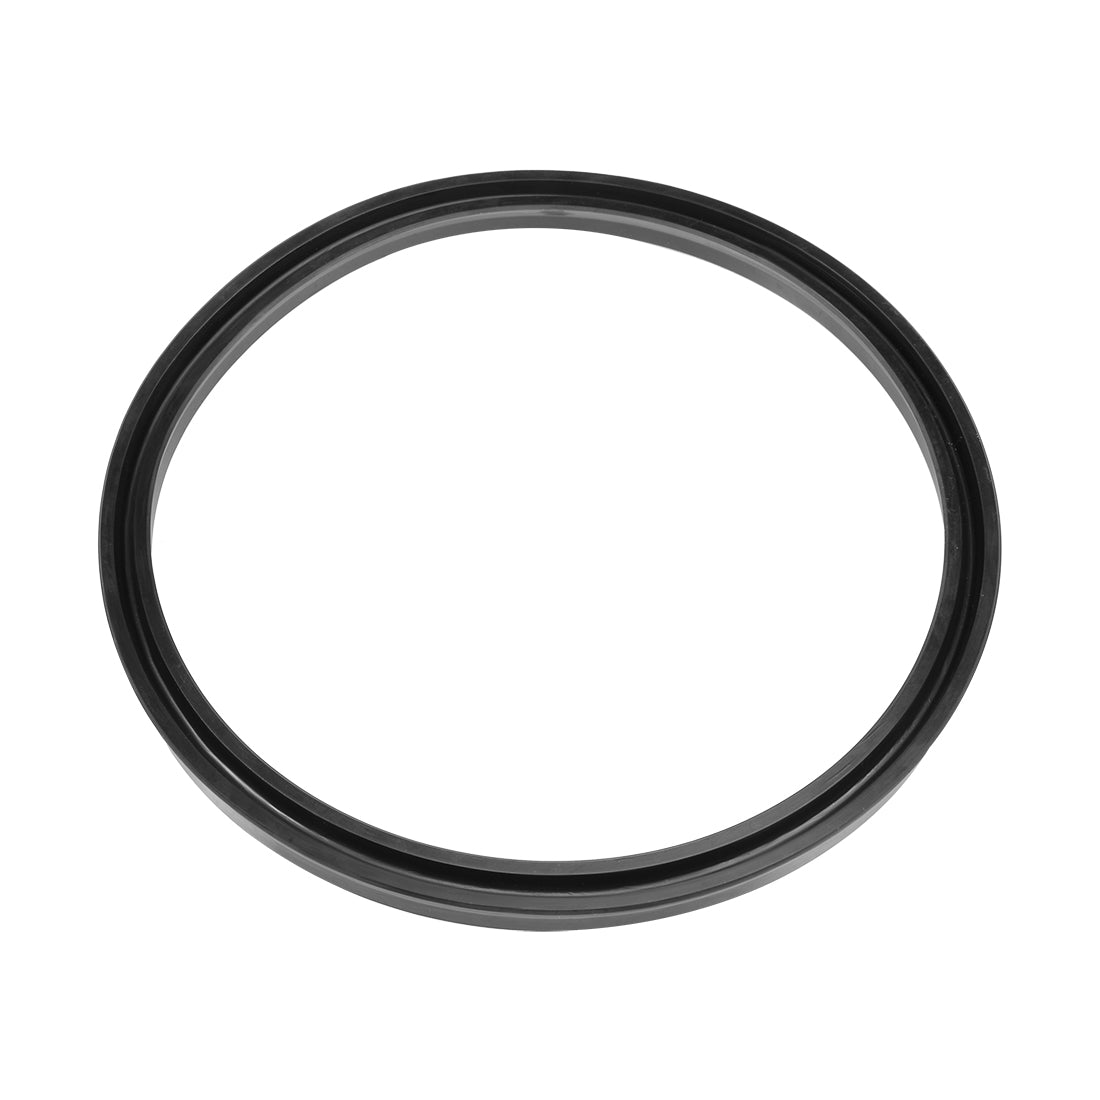 uxcell Uxcell Hydraulic Seal, Piston Shaft USH Oil Sealing O-Ring, 180mm x 200mm x 12mm